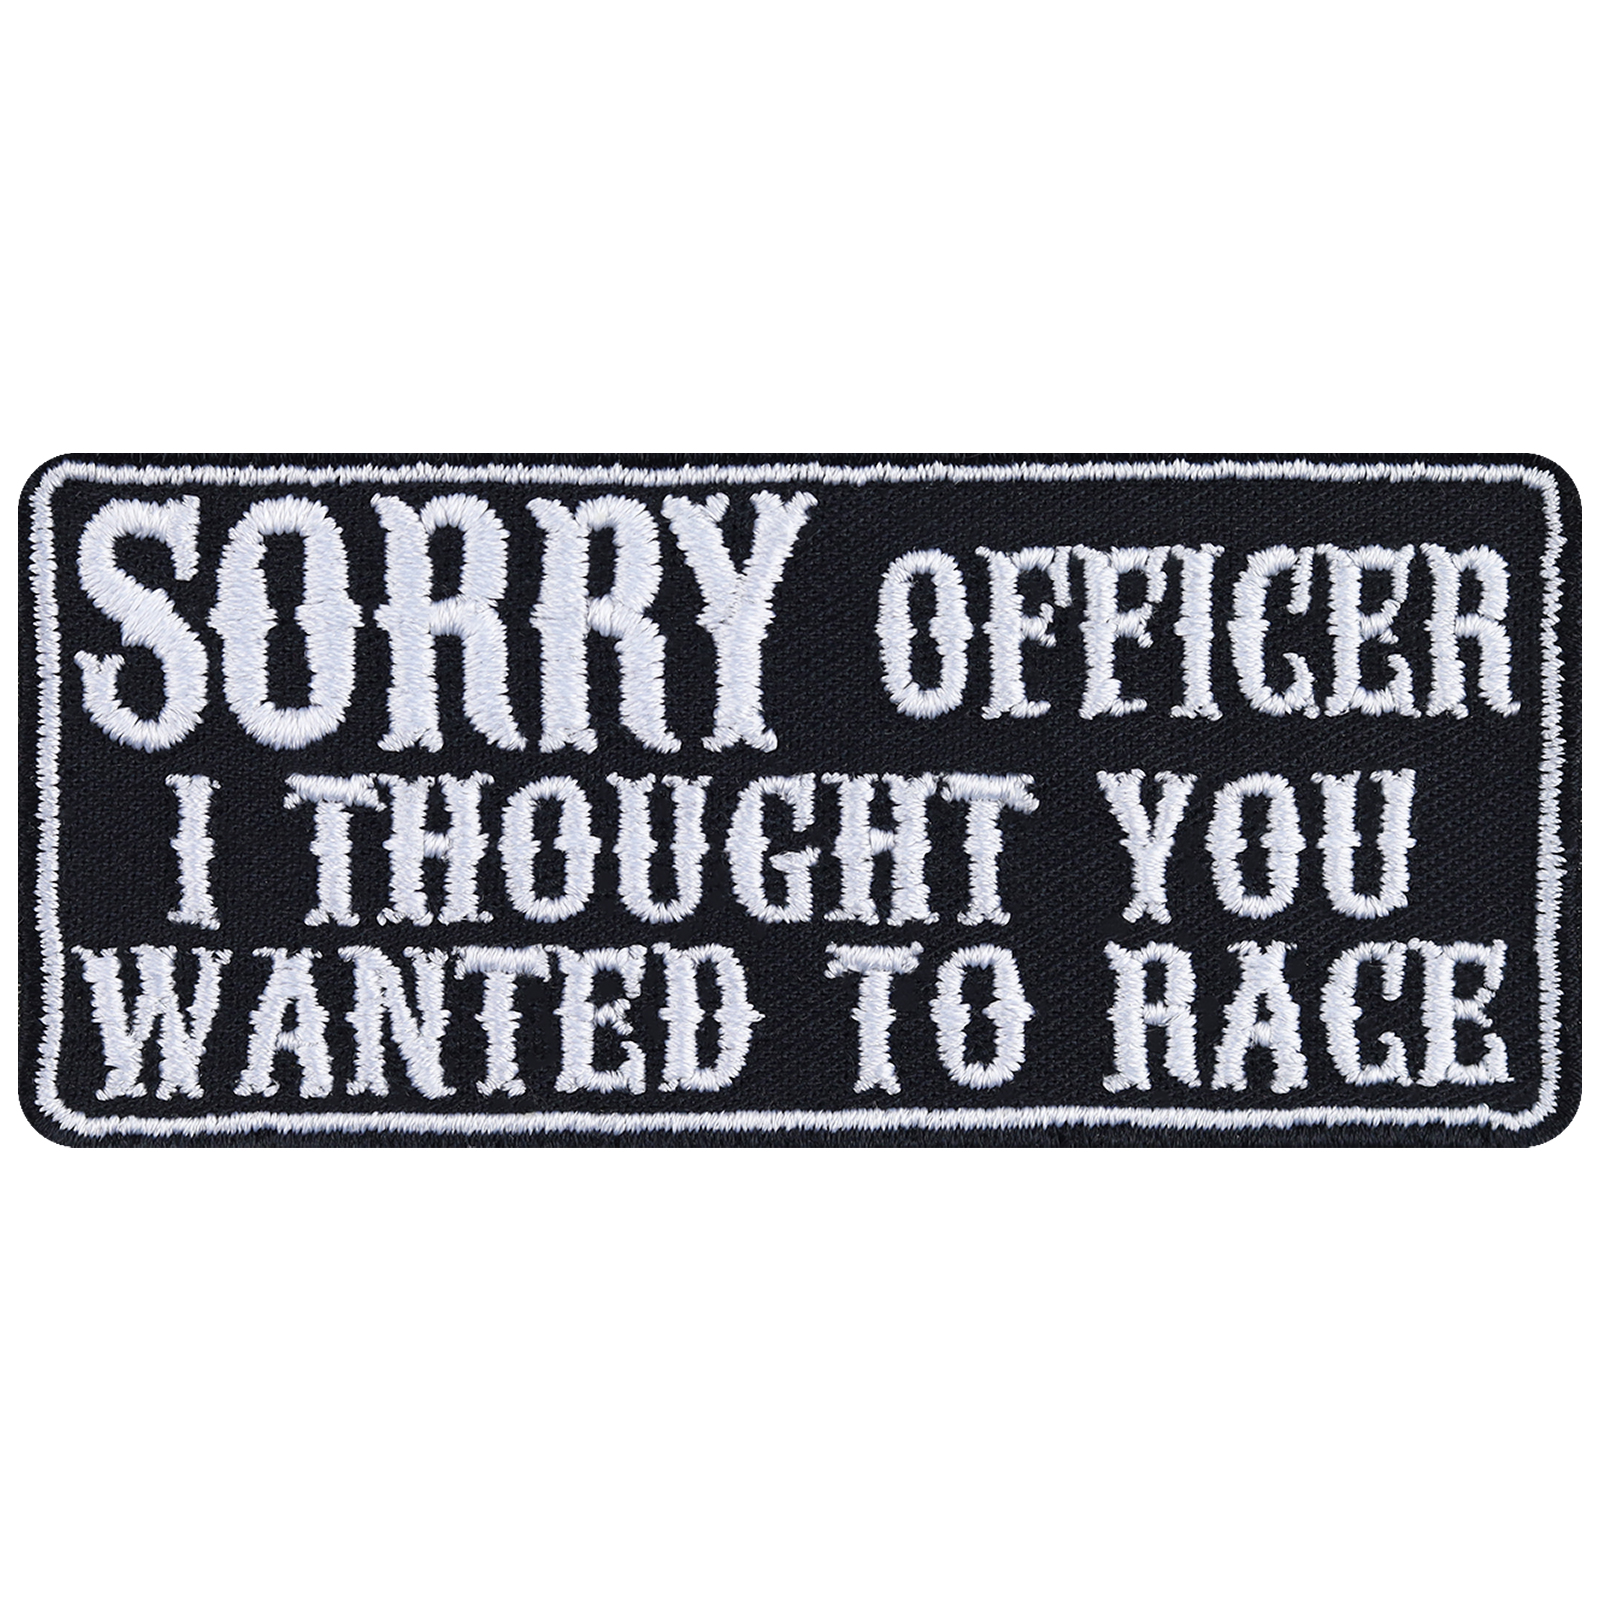 Sorry officer, I thought you wanted to race - Patch